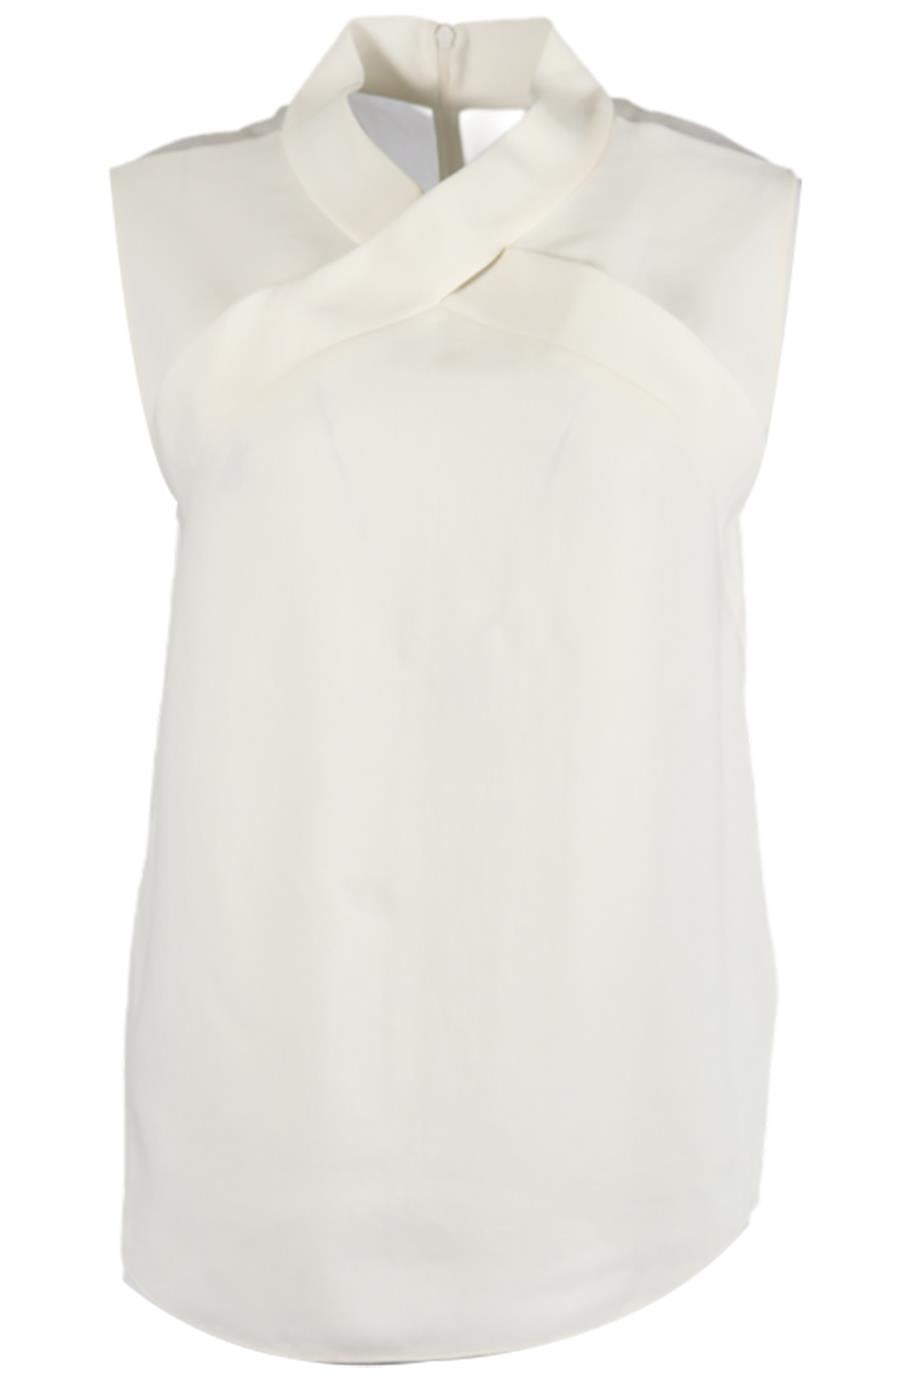 CEDRIC CHARLIER COTTON AND SILK BLEND BLOUSE IT 40 UK 8